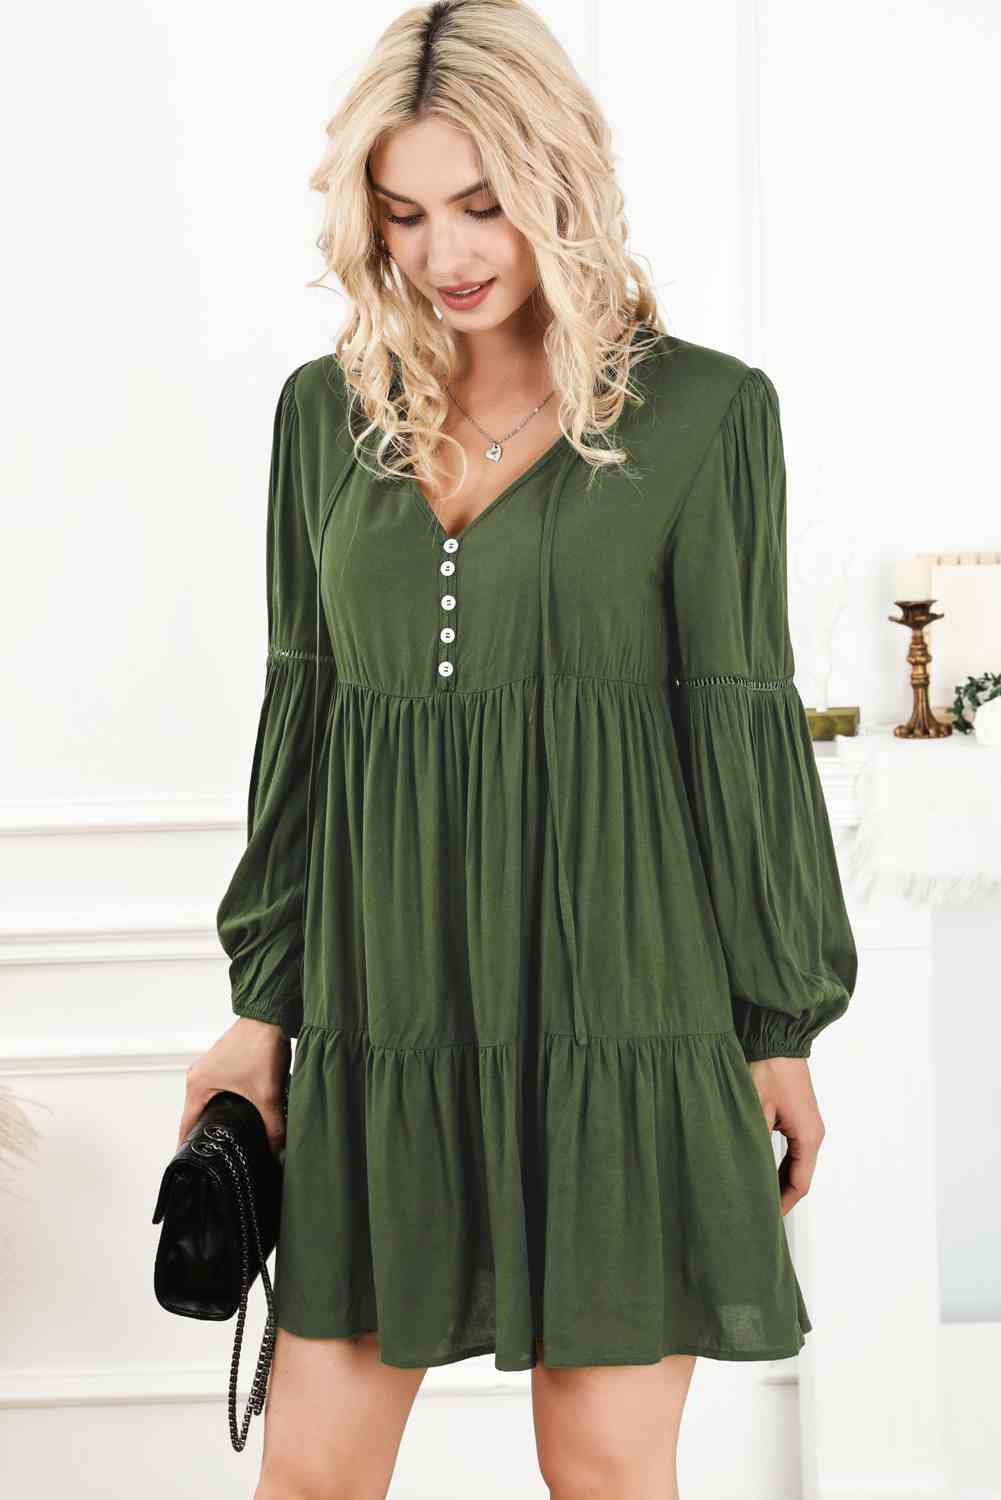 In The Green Tiered Dress